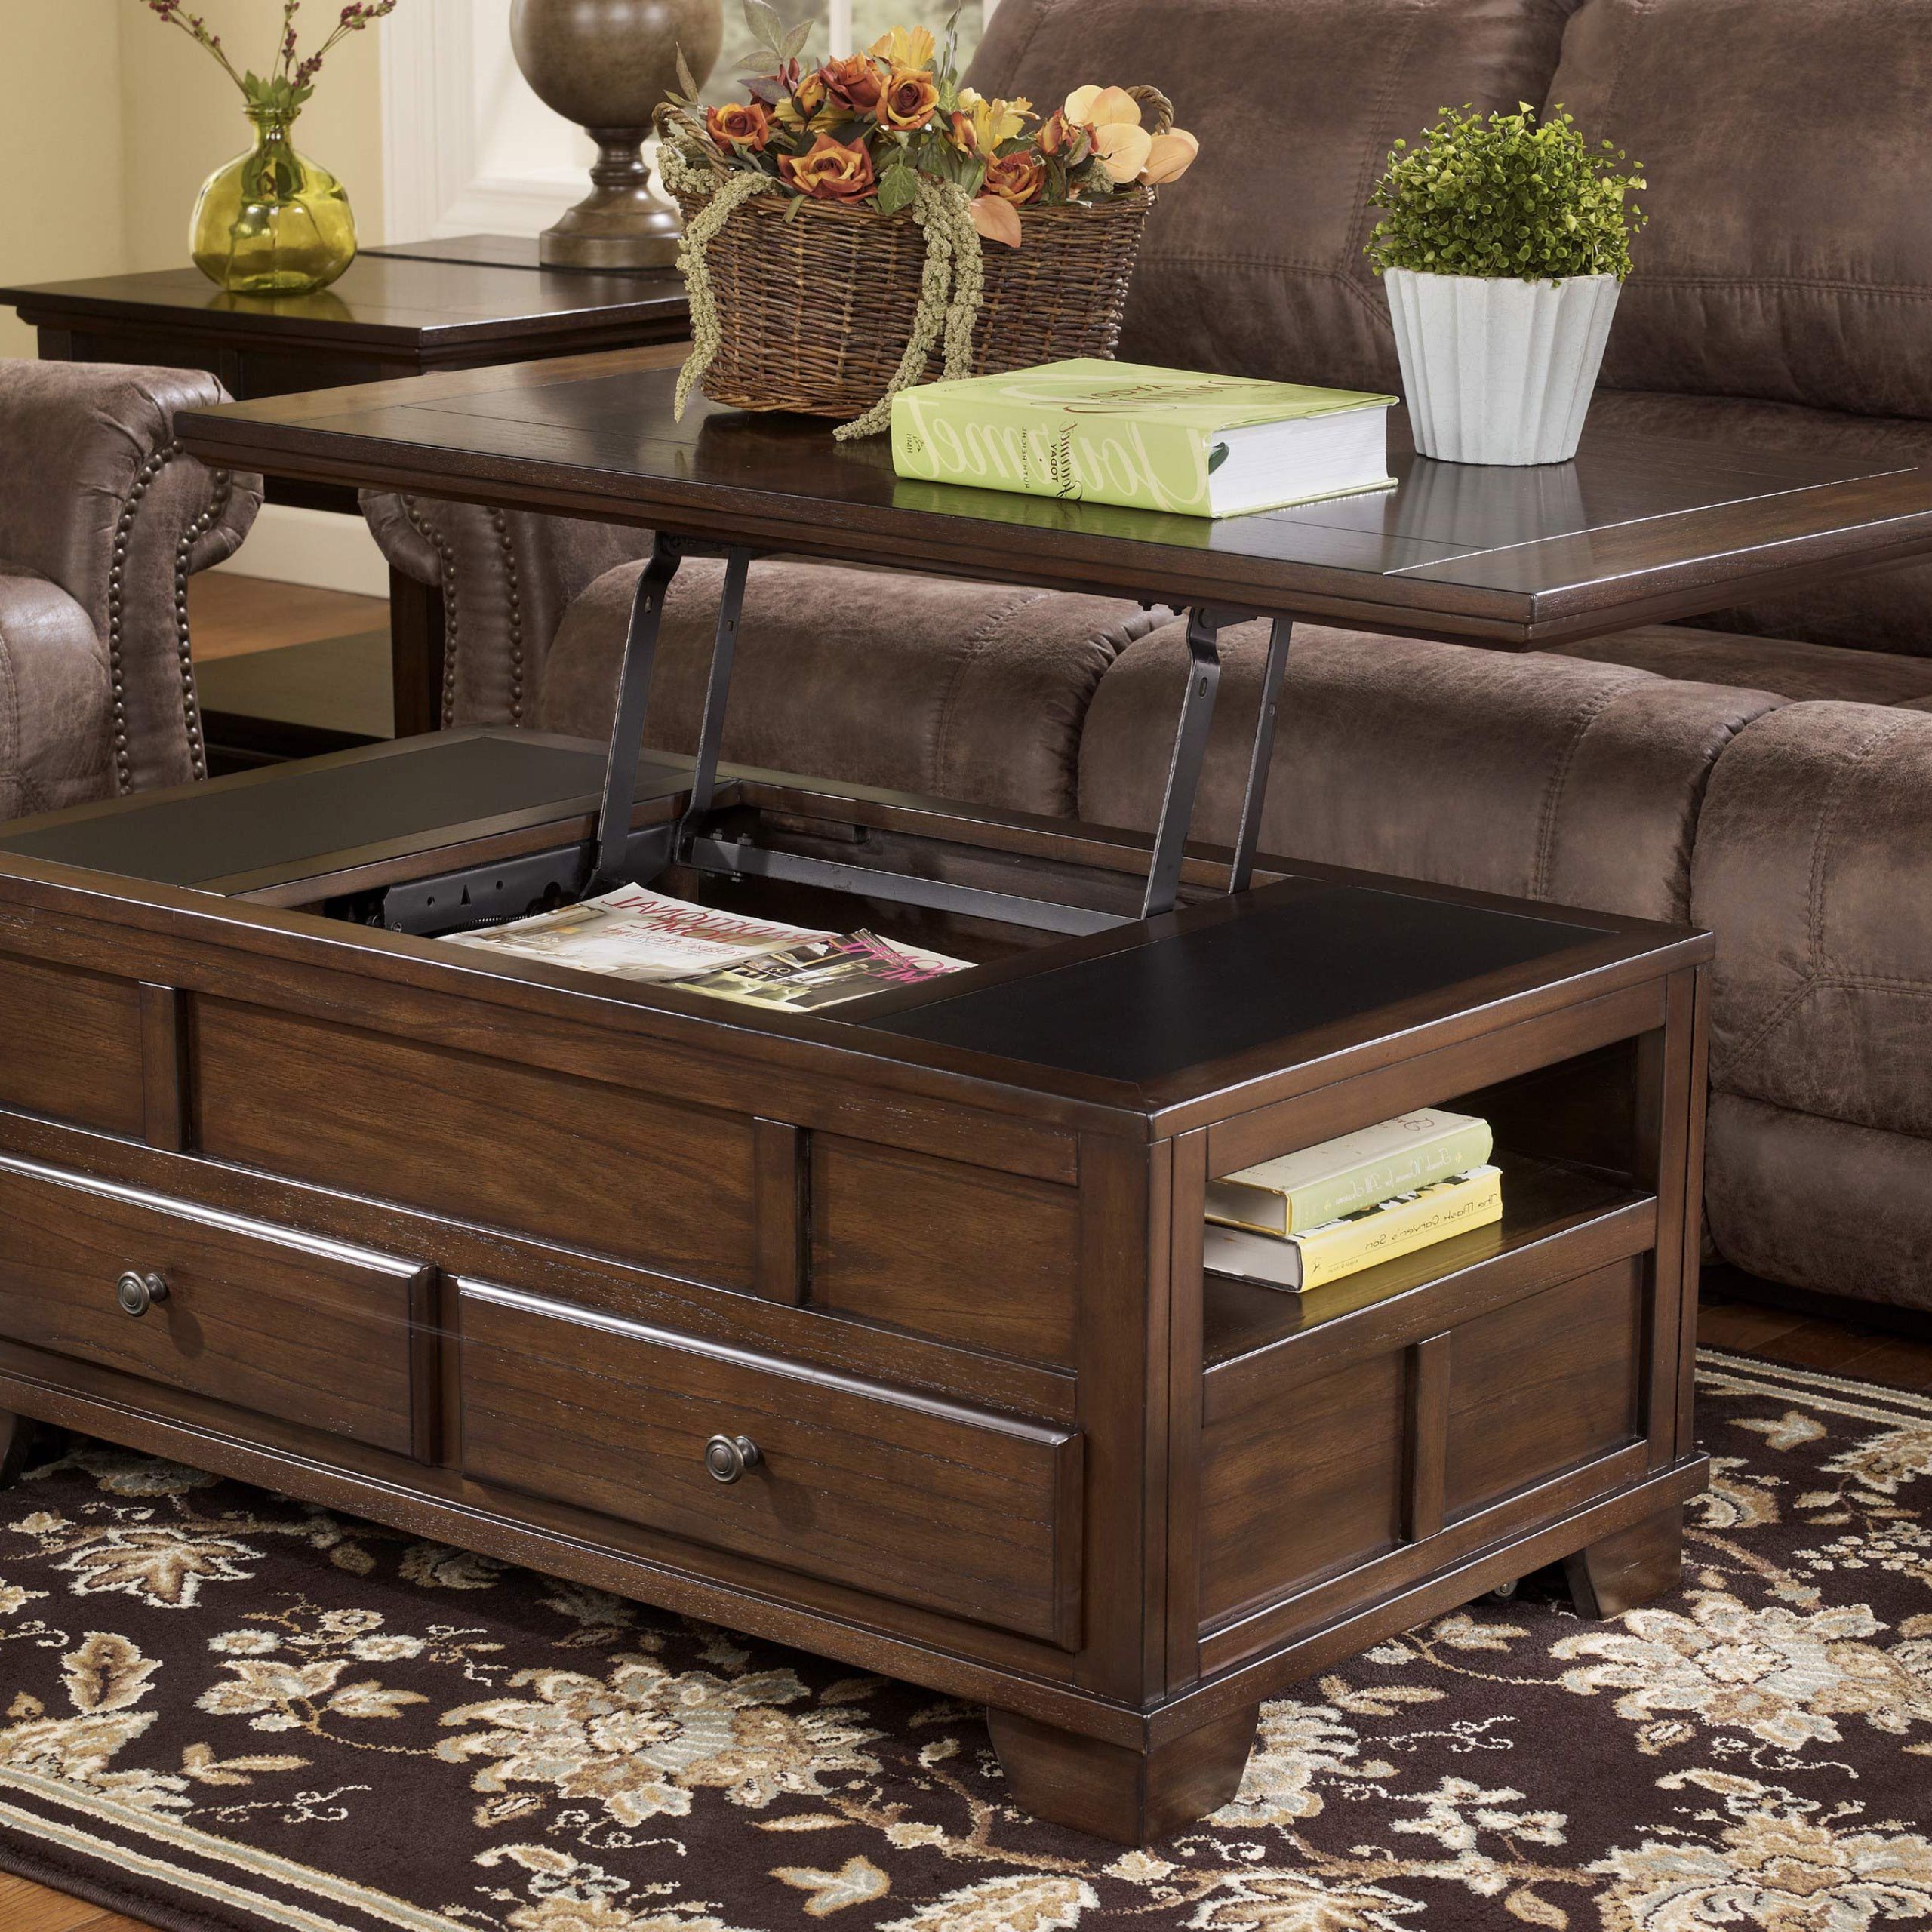 Lift Top Coffee Tables With Storage Within Lift Top Coffee Tables With Storage Drawers (View 3 of 15)